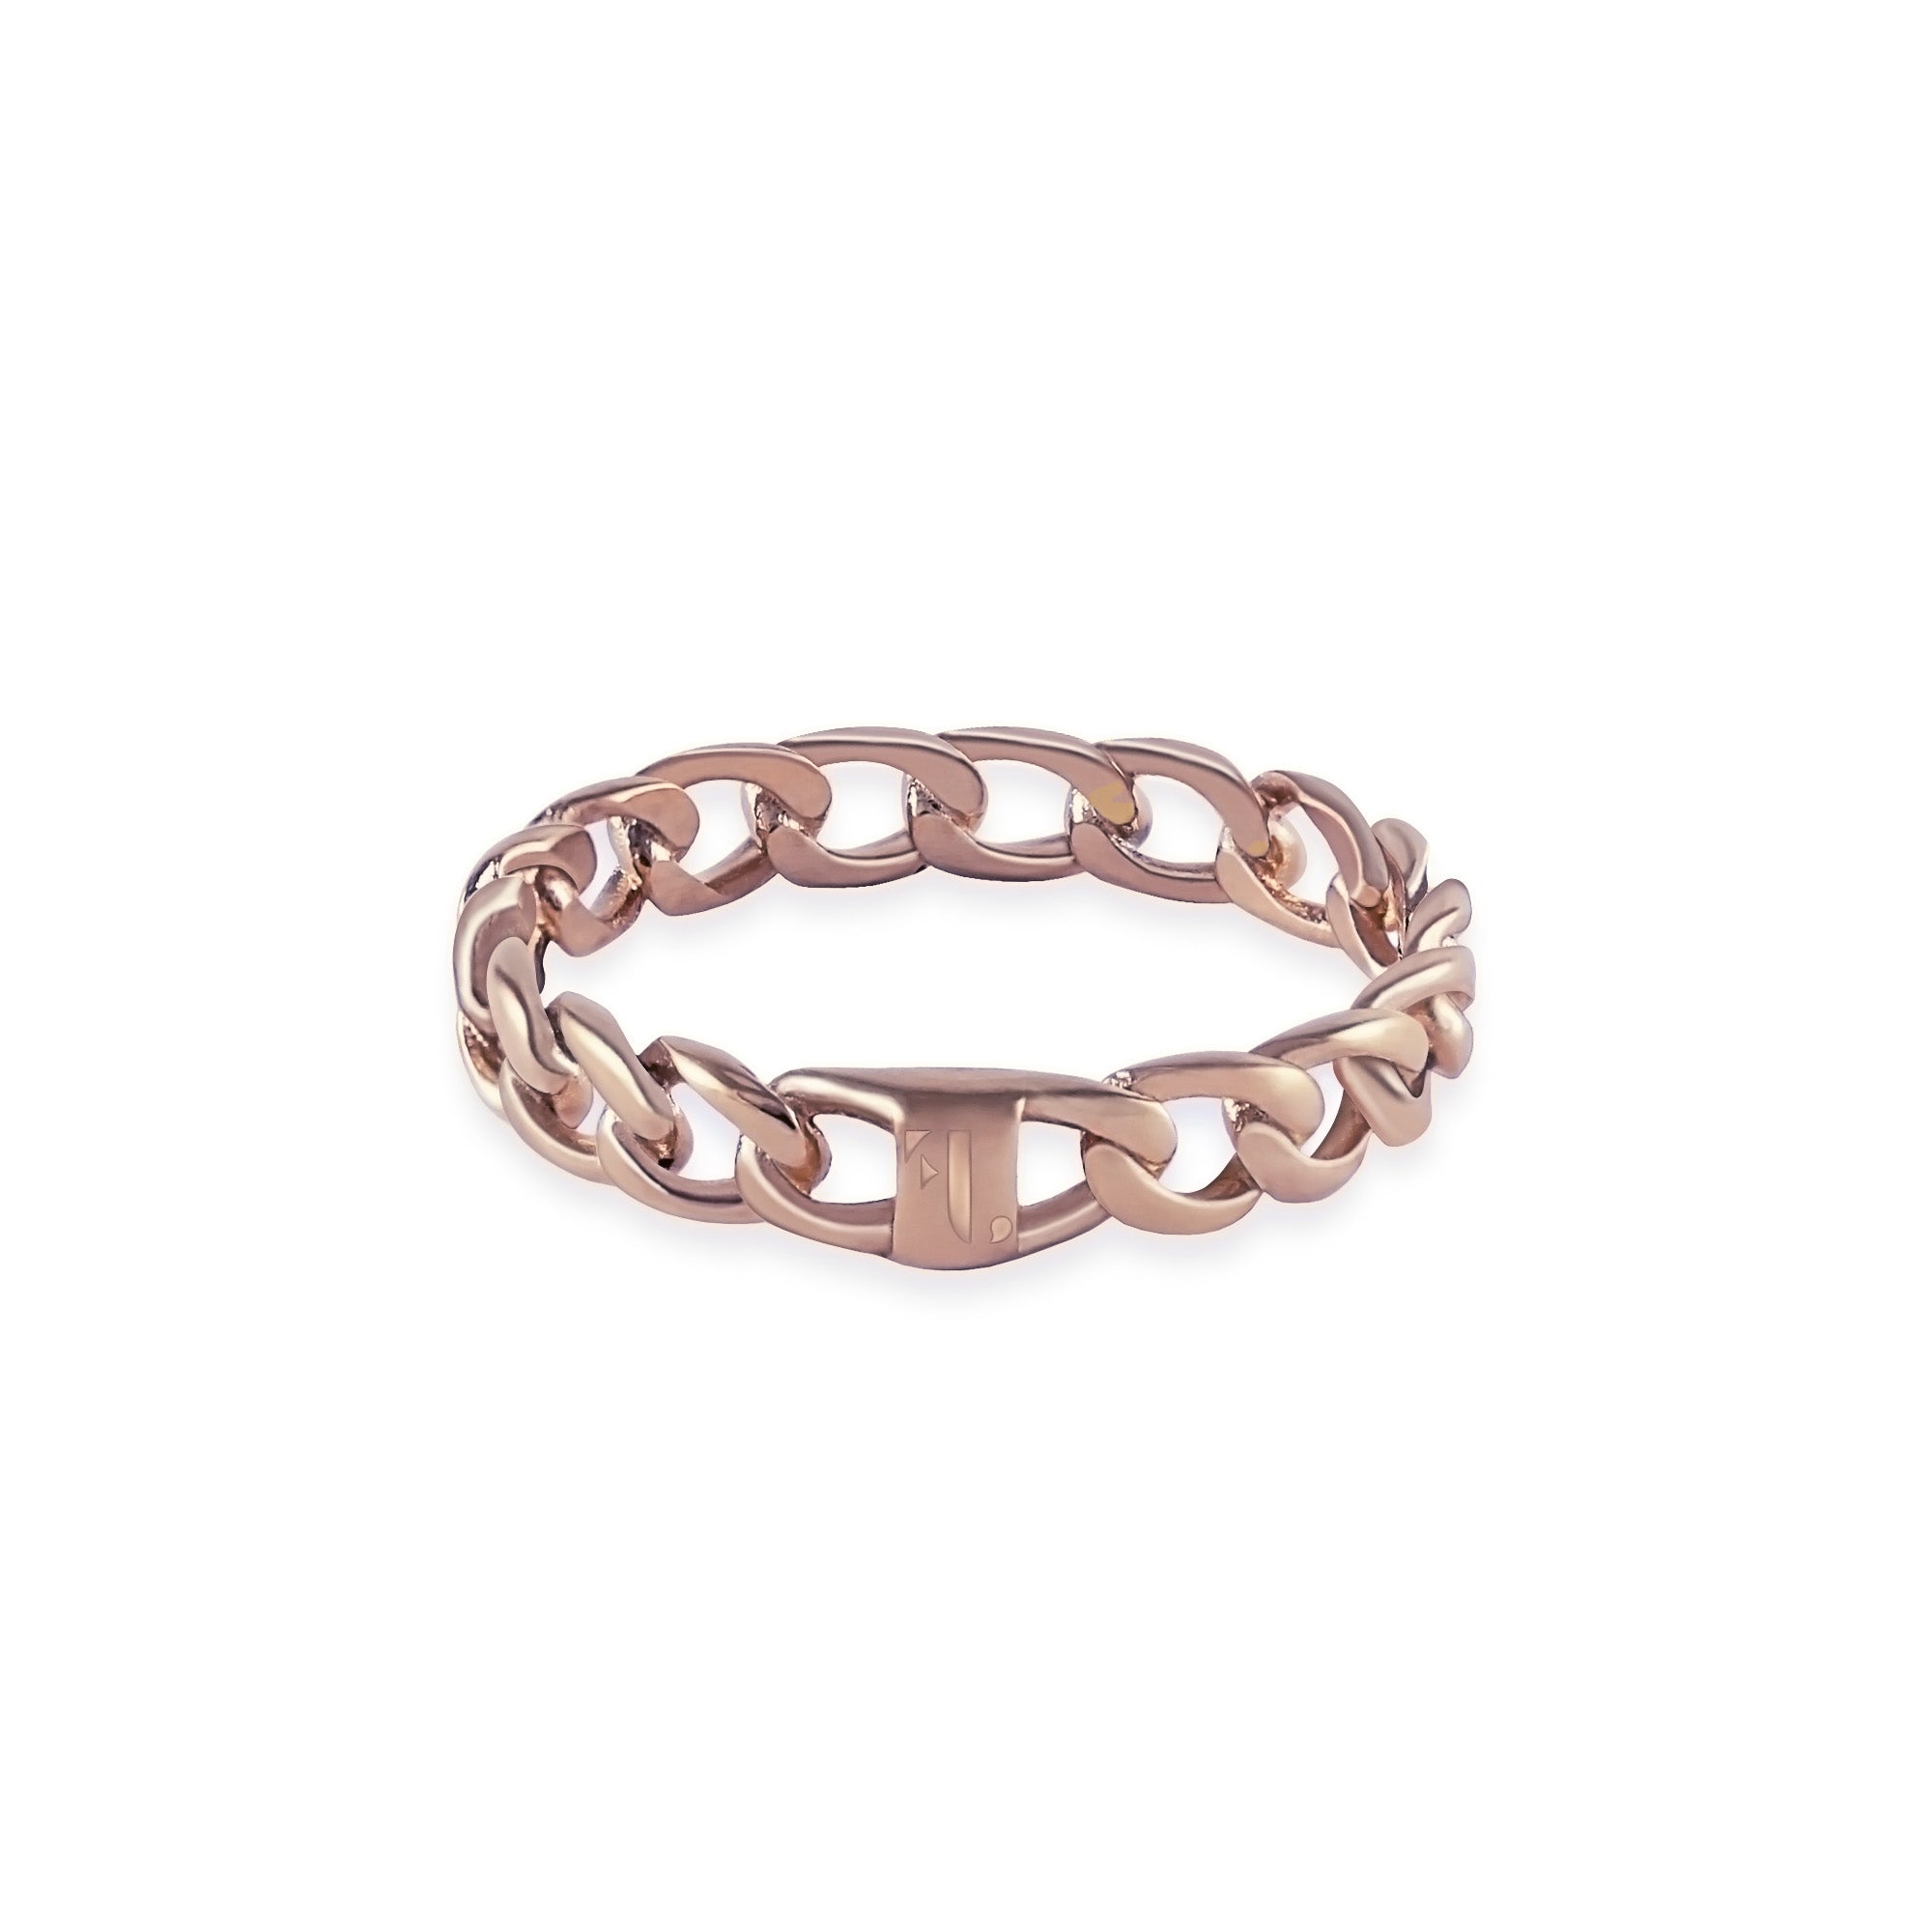 Baby Dusia women's ring by Five Jwlry in rose gold color, featuring a thin 4mm Cuban chain design with an engraved signature logo. Made from water-resistant 316L stainless steel. Hypoallergenic with a 2-year warranty.